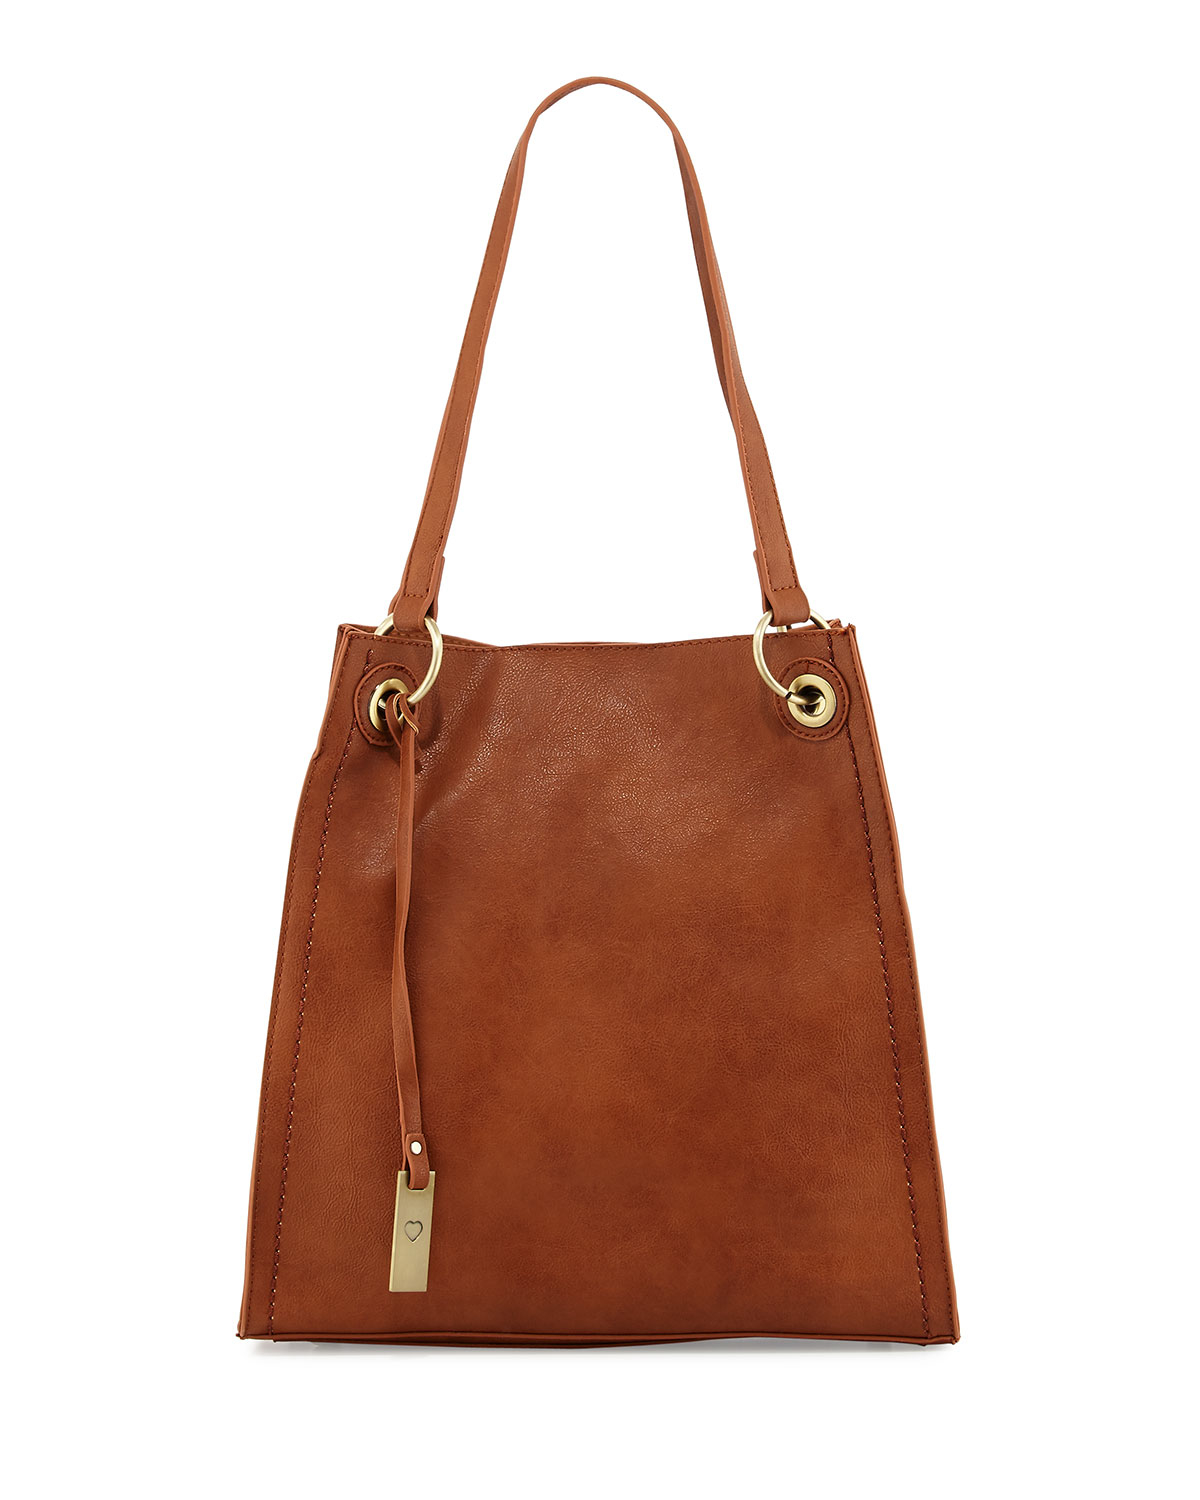 Urban Originals Montana Faux-leather Tote Bag in Chocolate (Brown) - Lyst